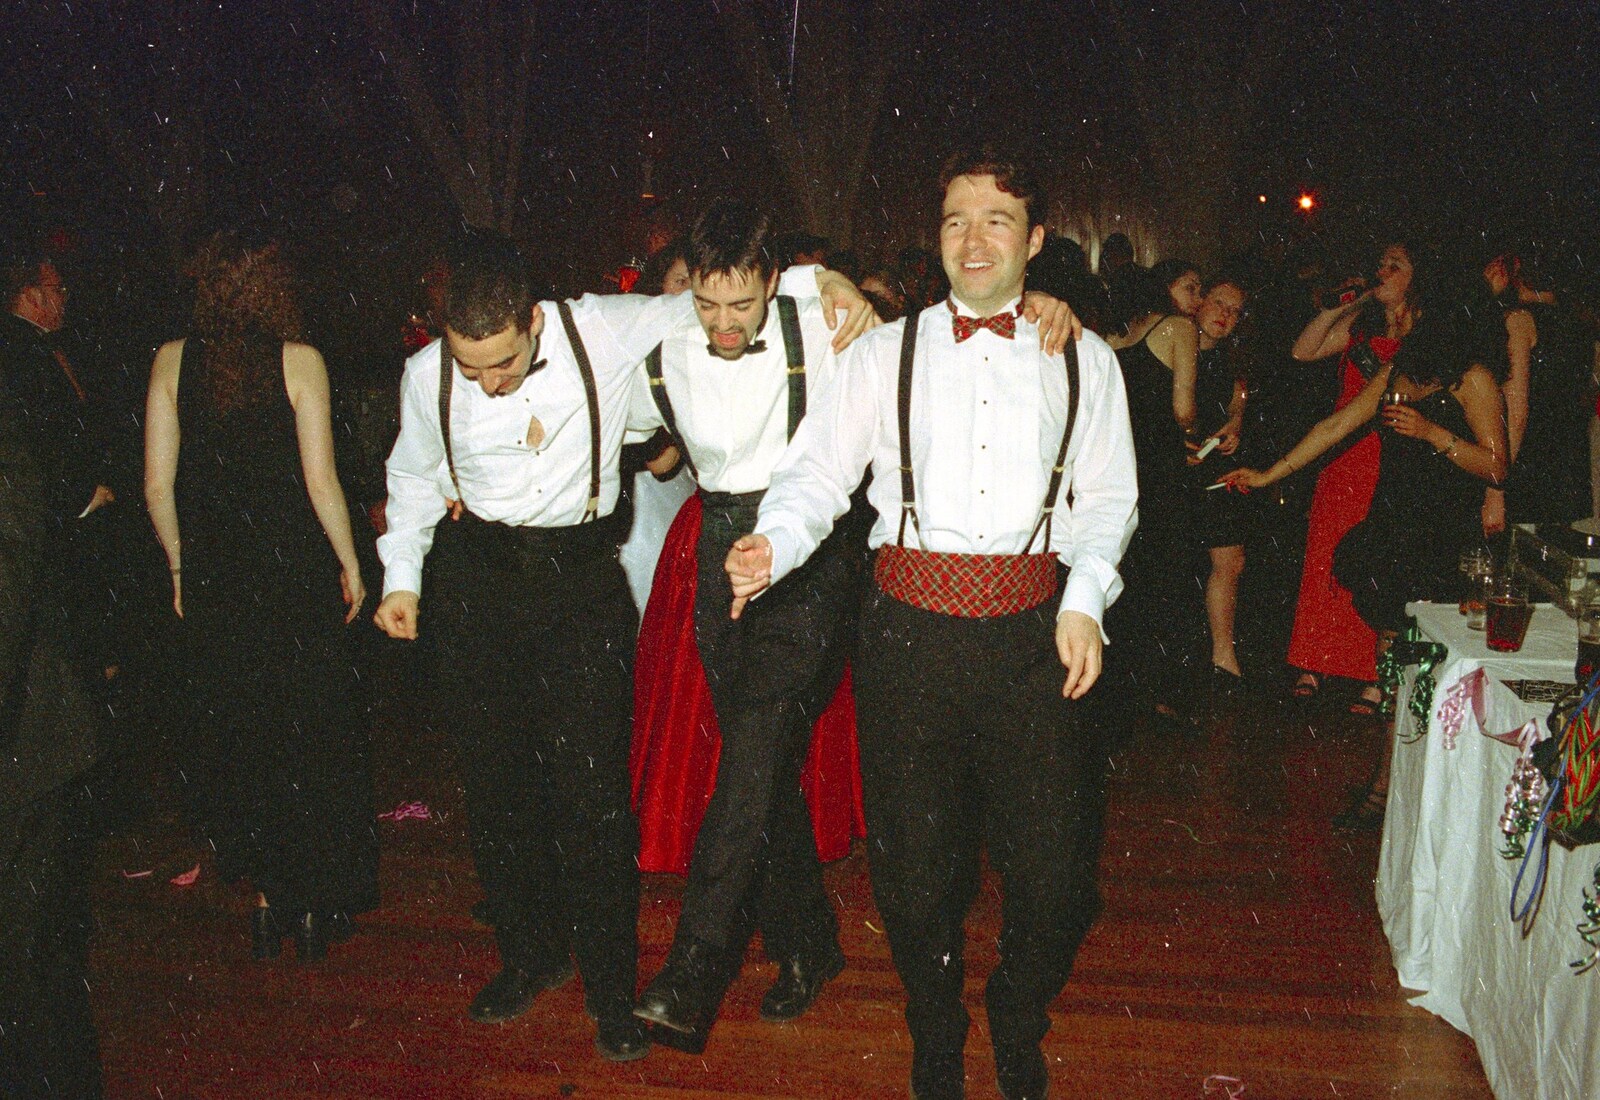 The lads are dancing from CISU at the Suffolk College May Ball, Ipswich, Suffolk - 11th May 1997